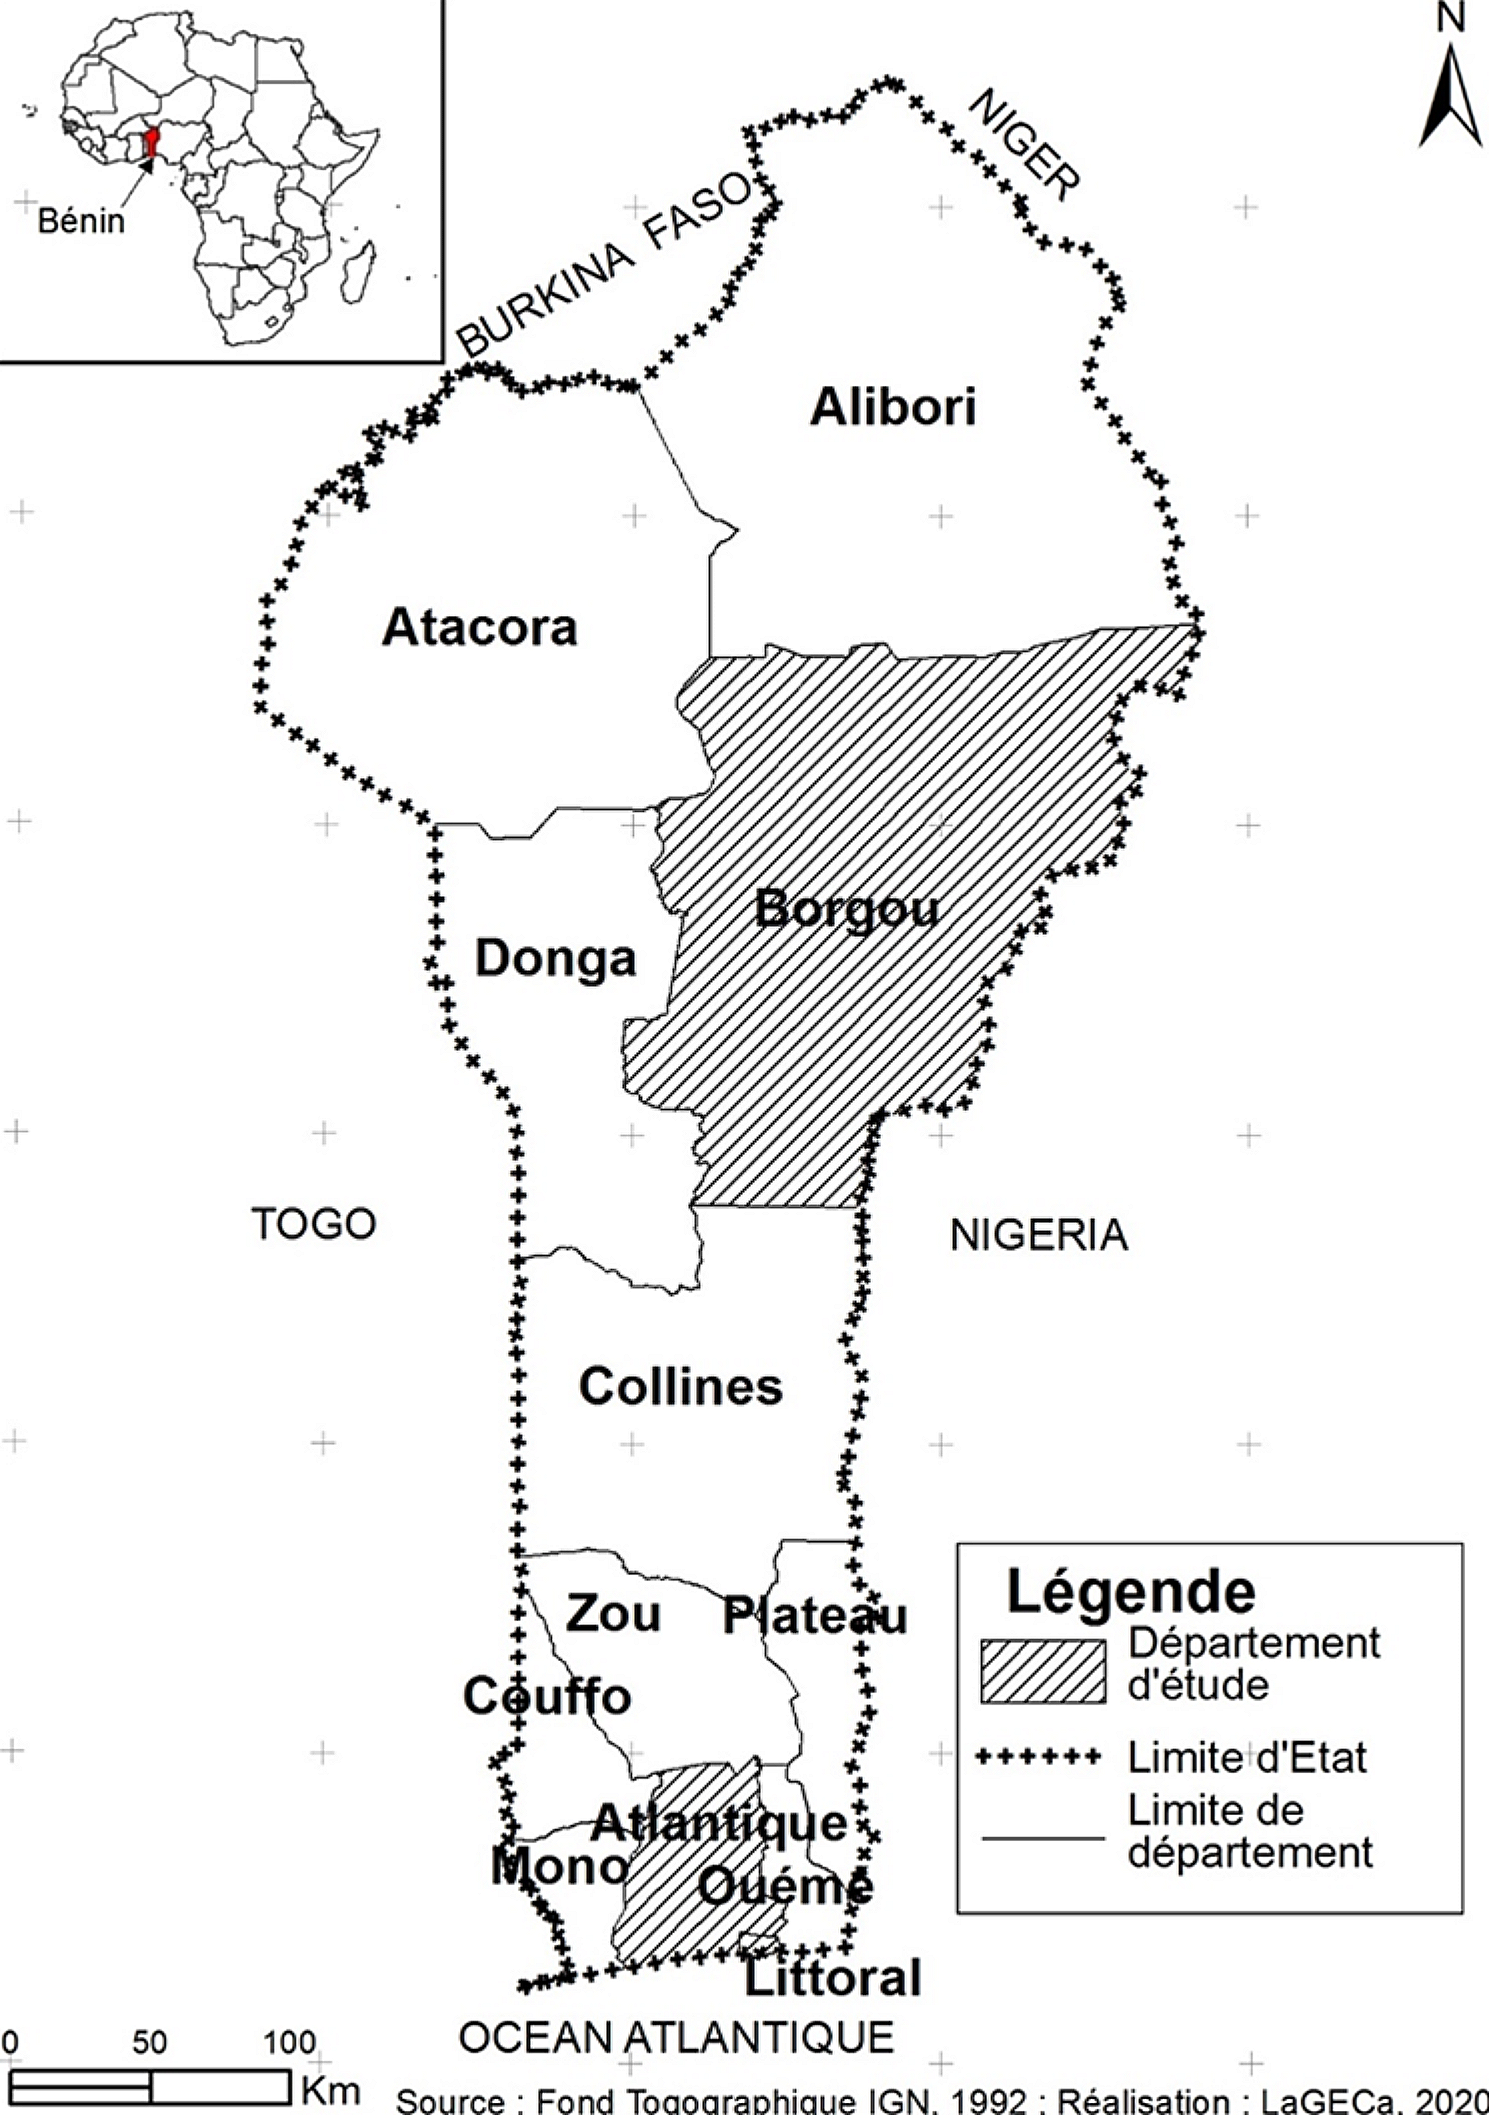 The prevalence and demographic associations of headache in the adult population of Benin: a cross-sectional population-based study